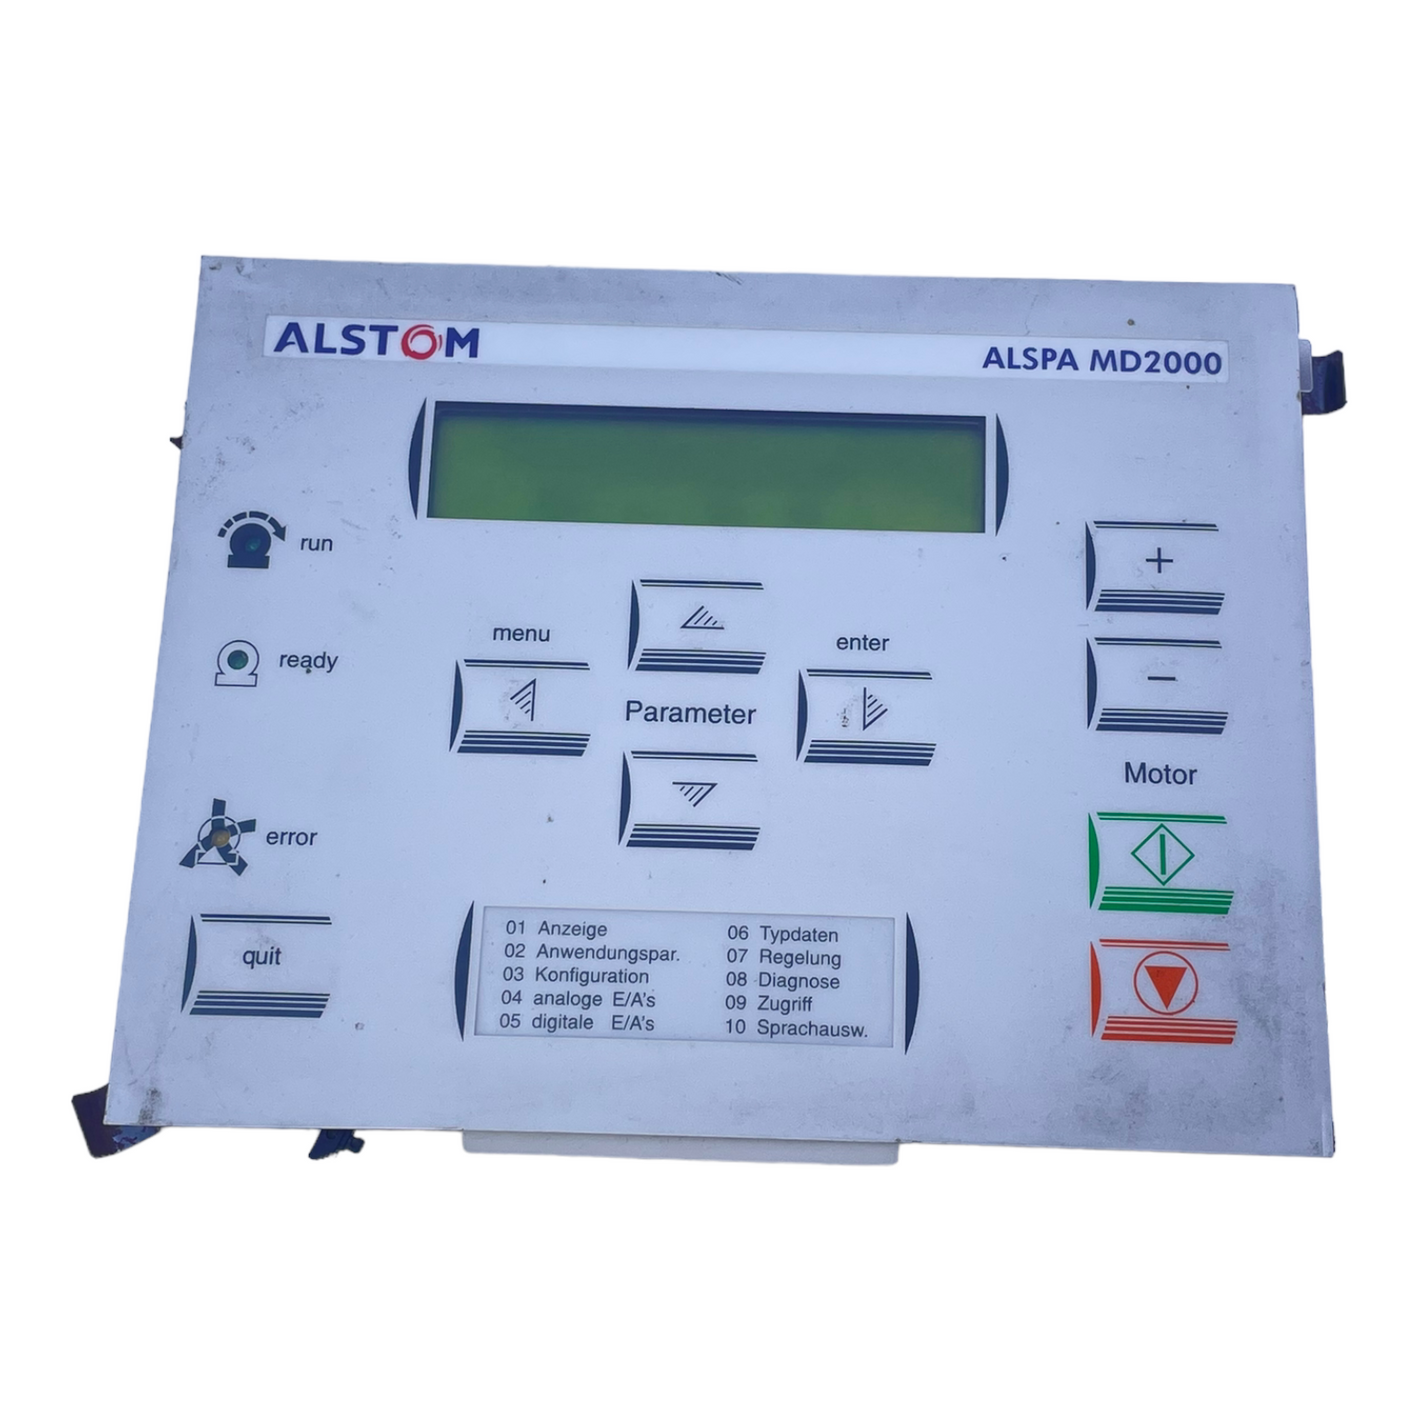 Alstom MD2000 control unit 029.144456/05 for industrial applications